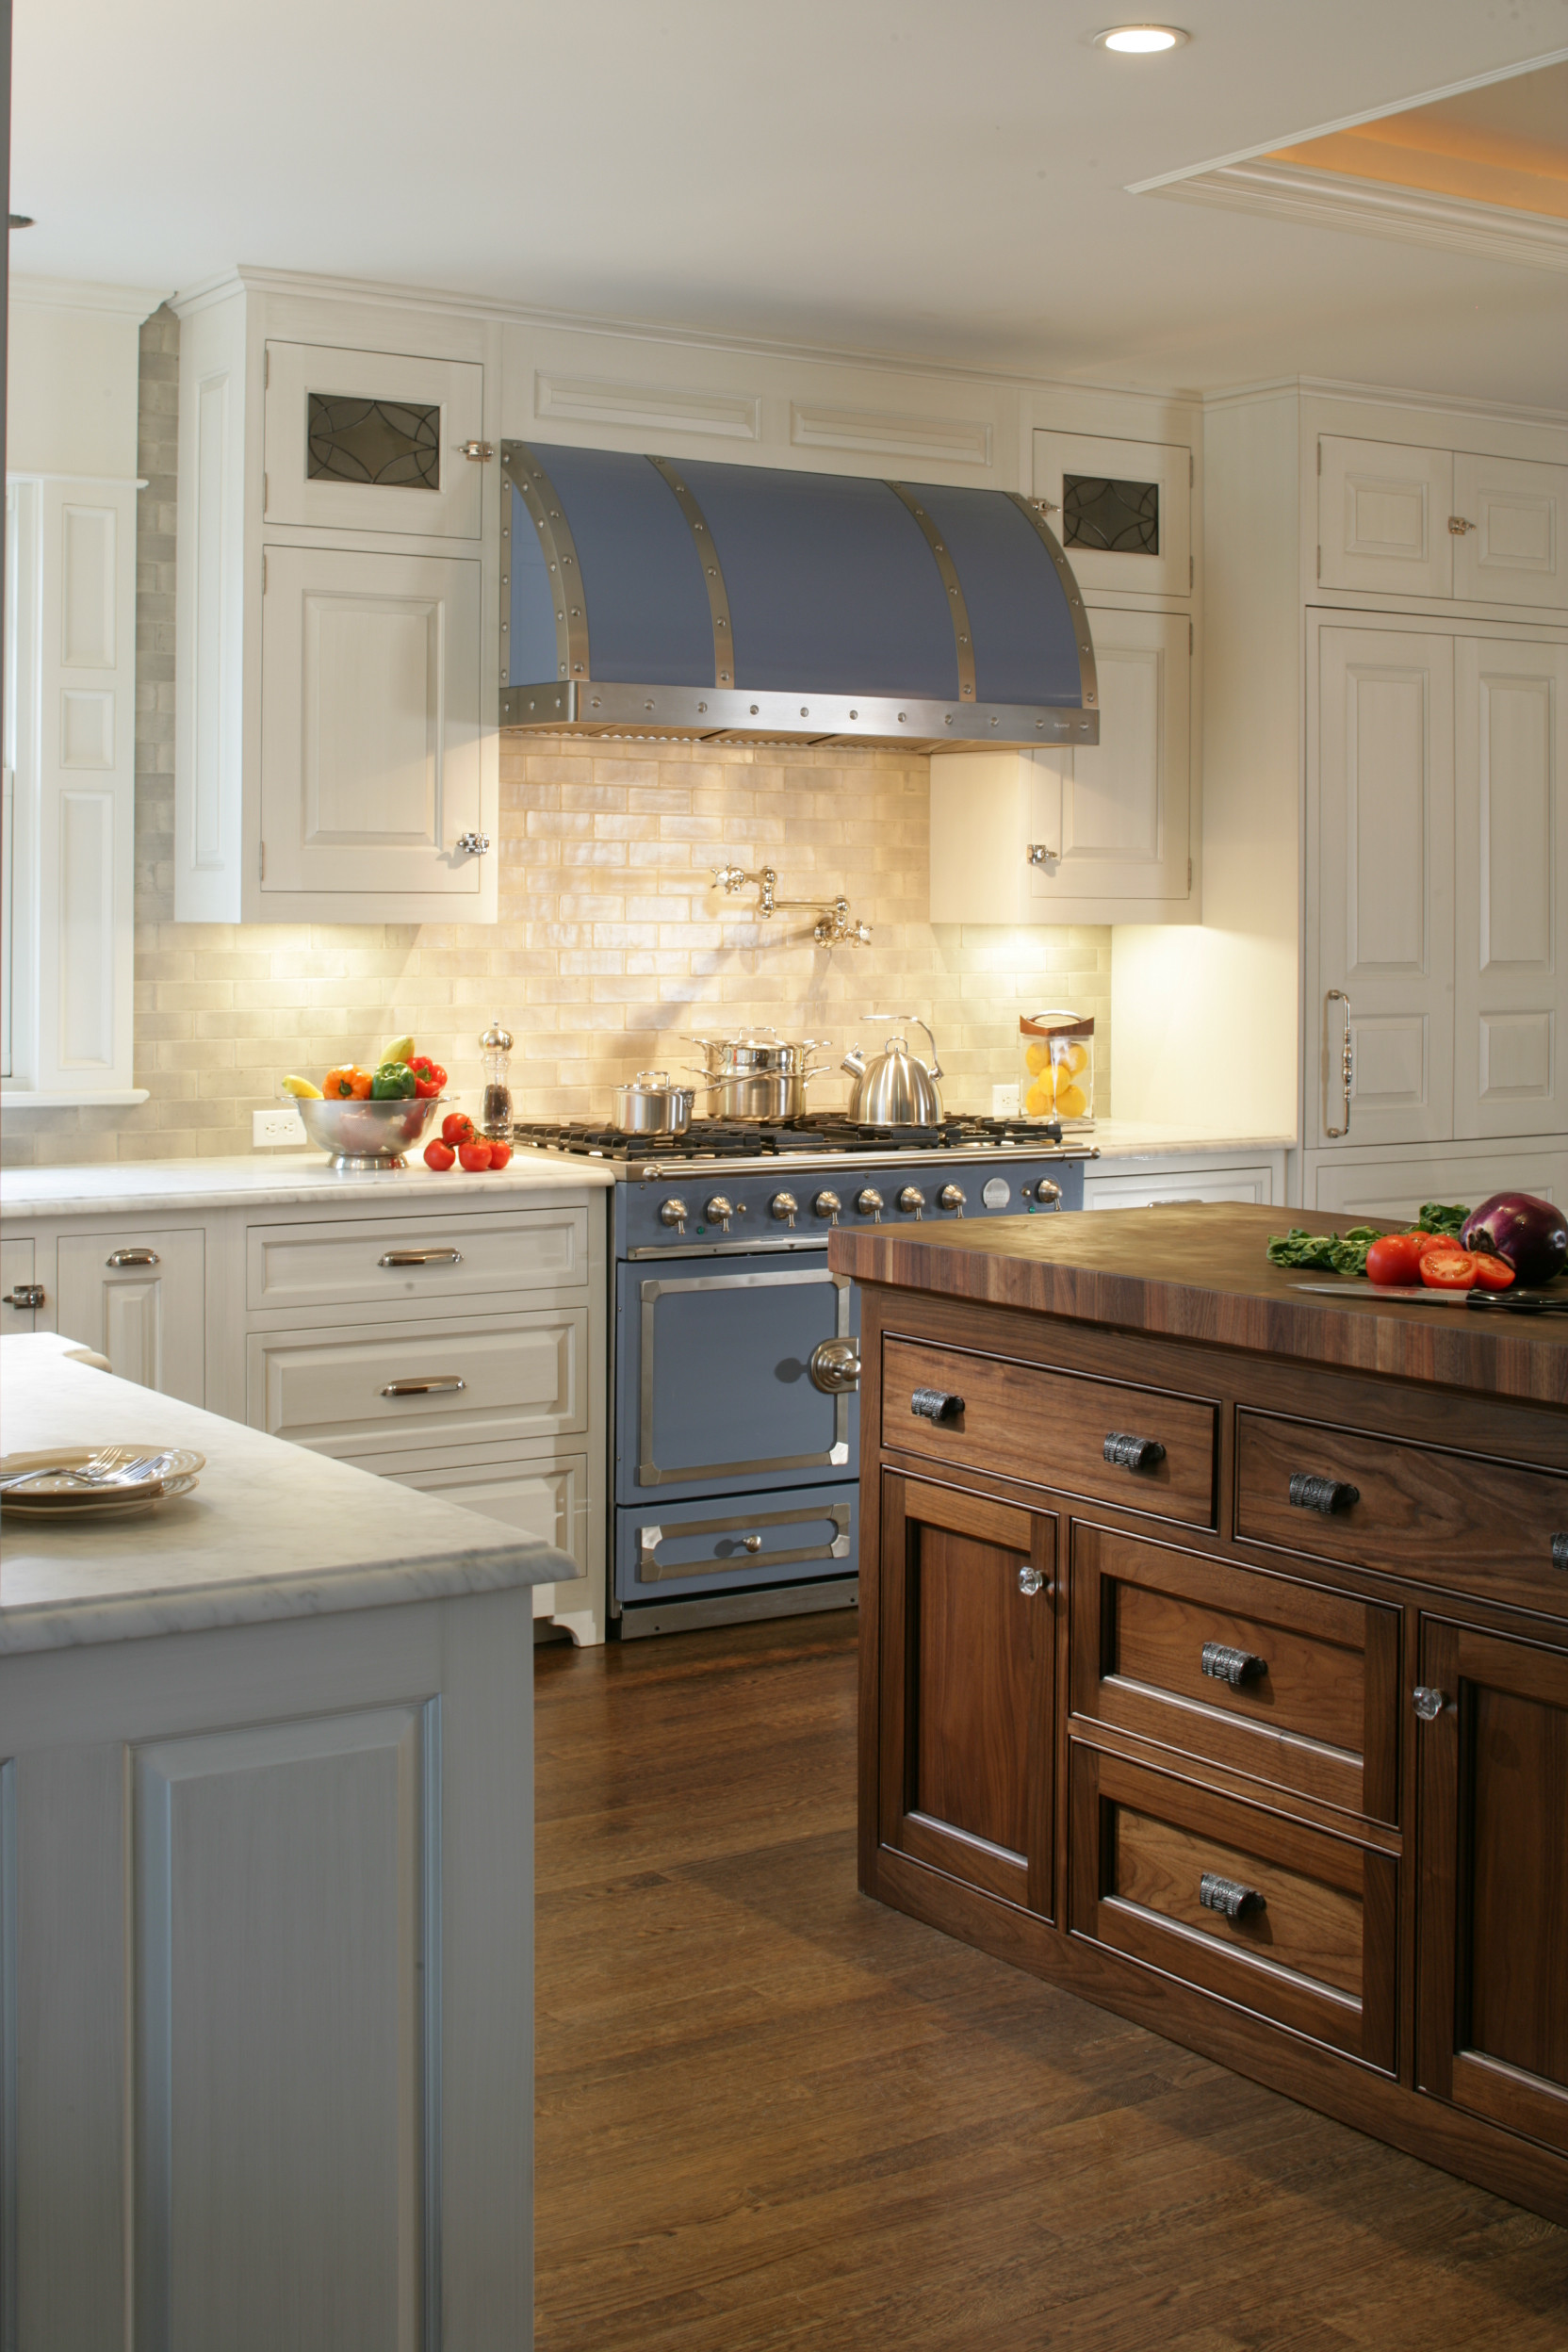 Stunning white kitchen cabinets with gray glaze Gray Glazed White Cabinets Houzz